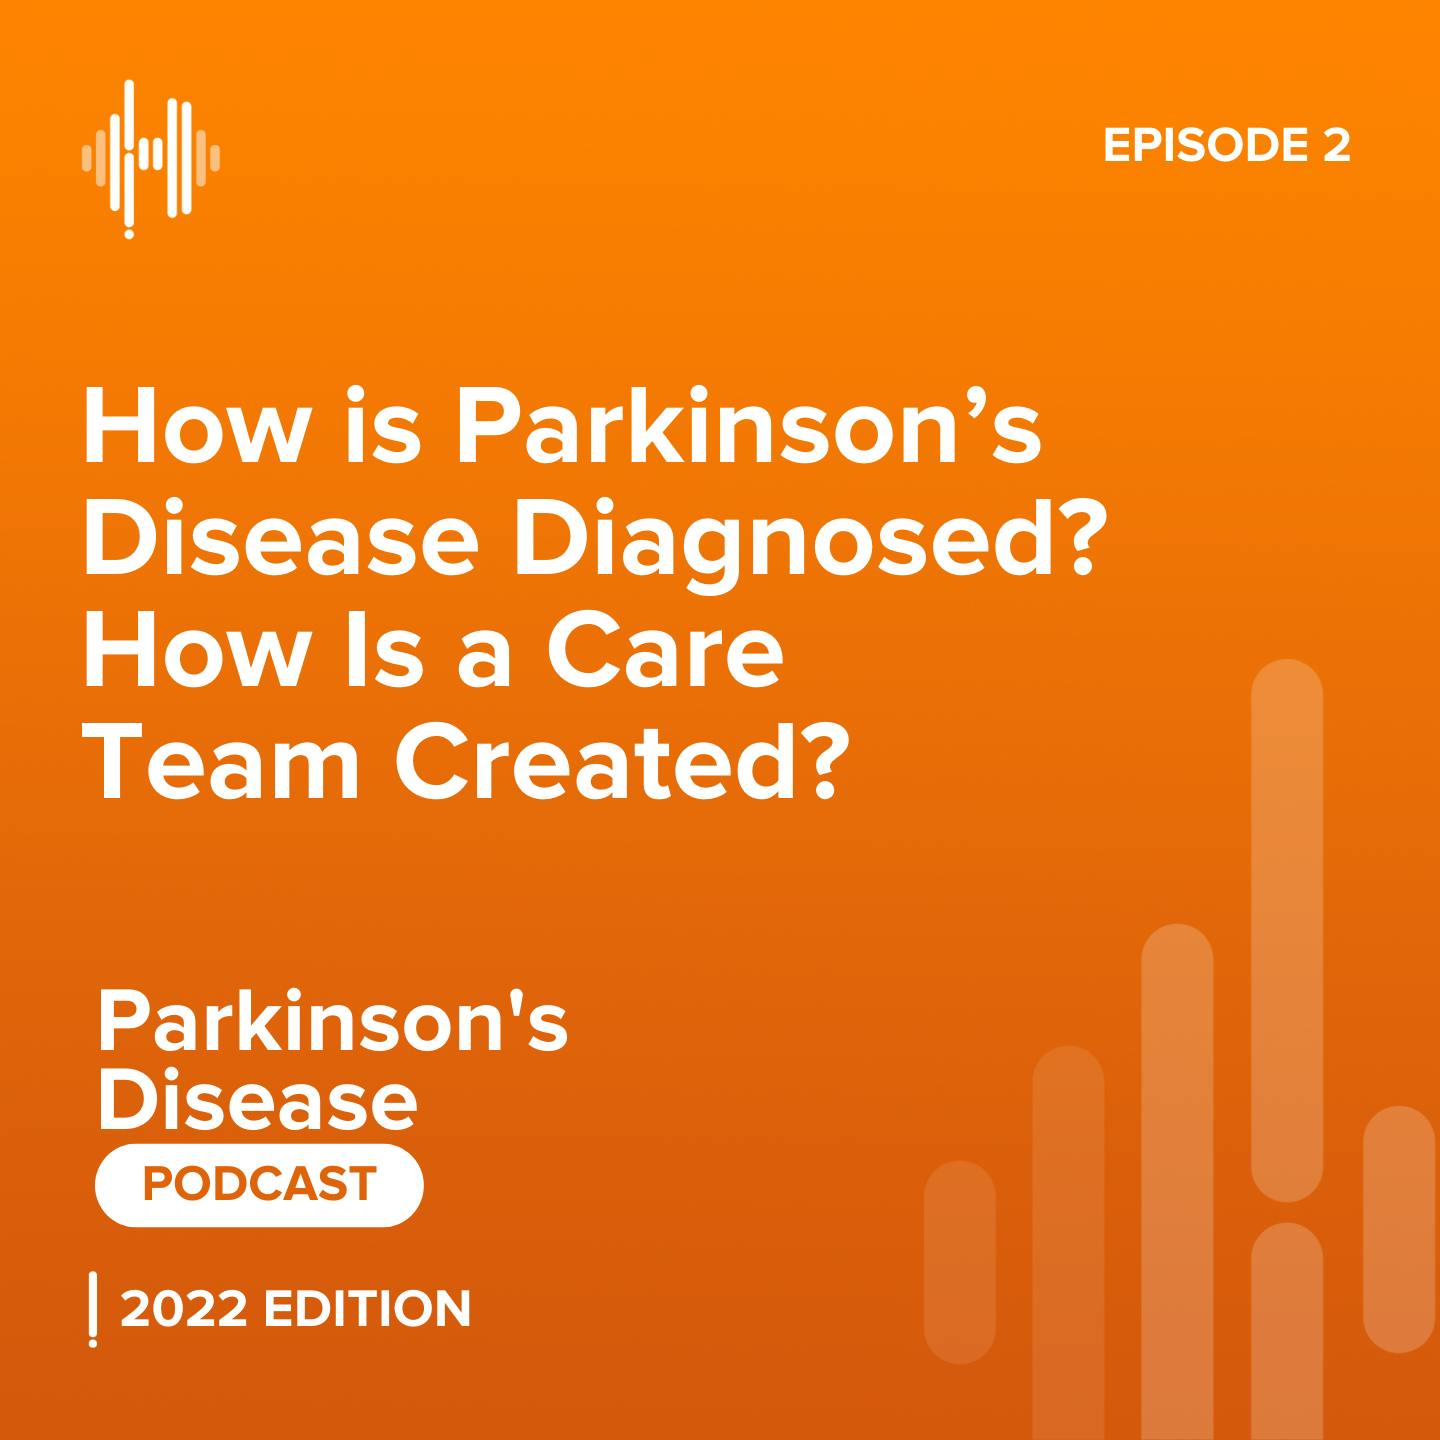 Ep 2: How is Parkinson’s Disease Diagnosed? And How Is a Care Team Created?